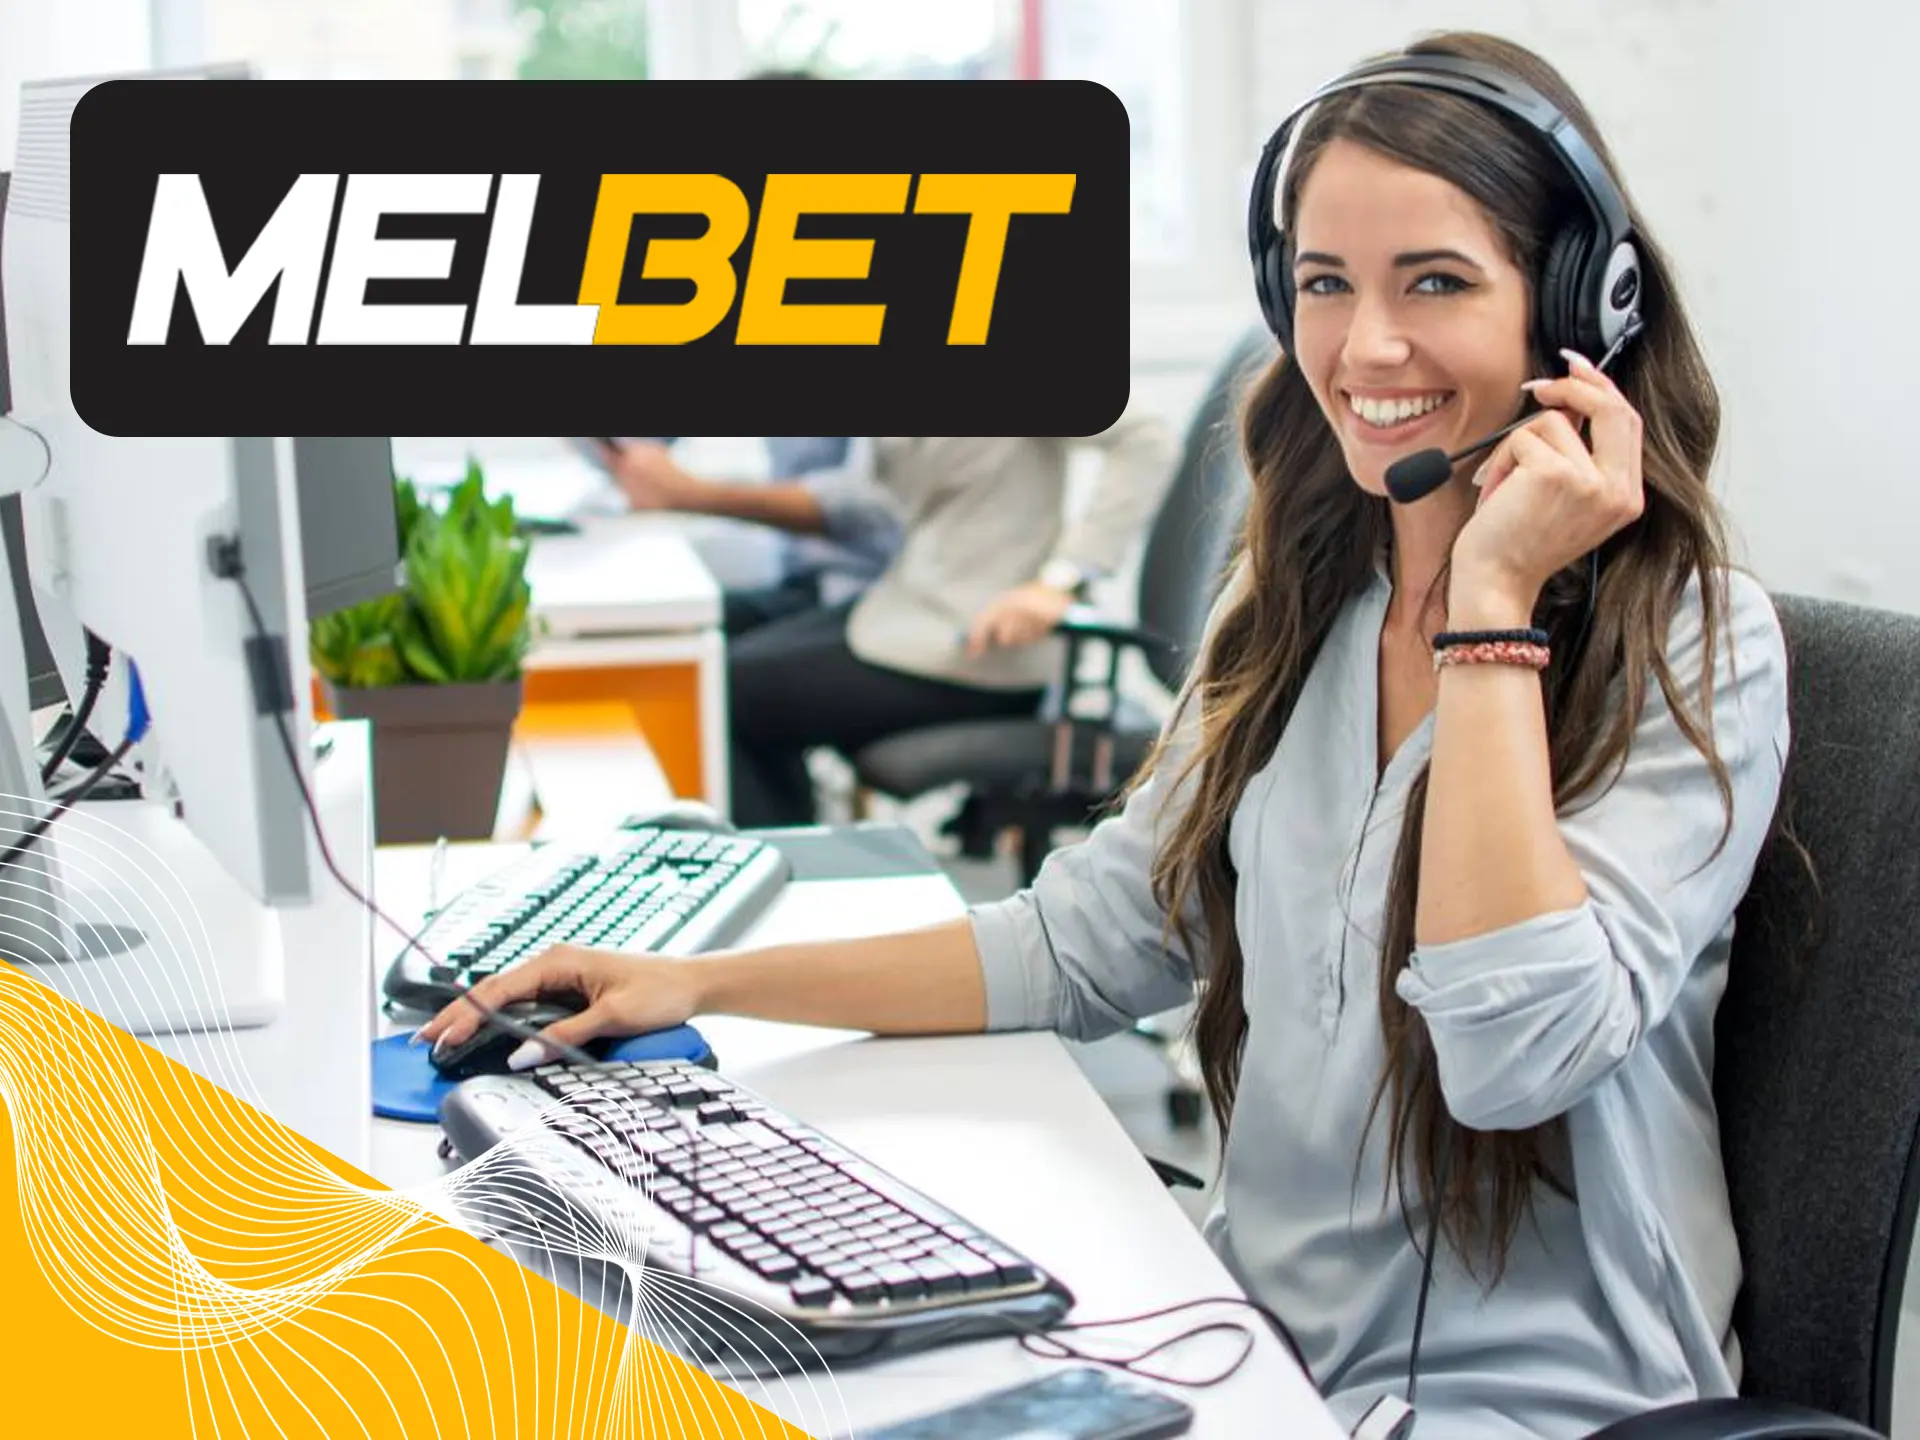 Ask for help Melbet support if you struggle with something.